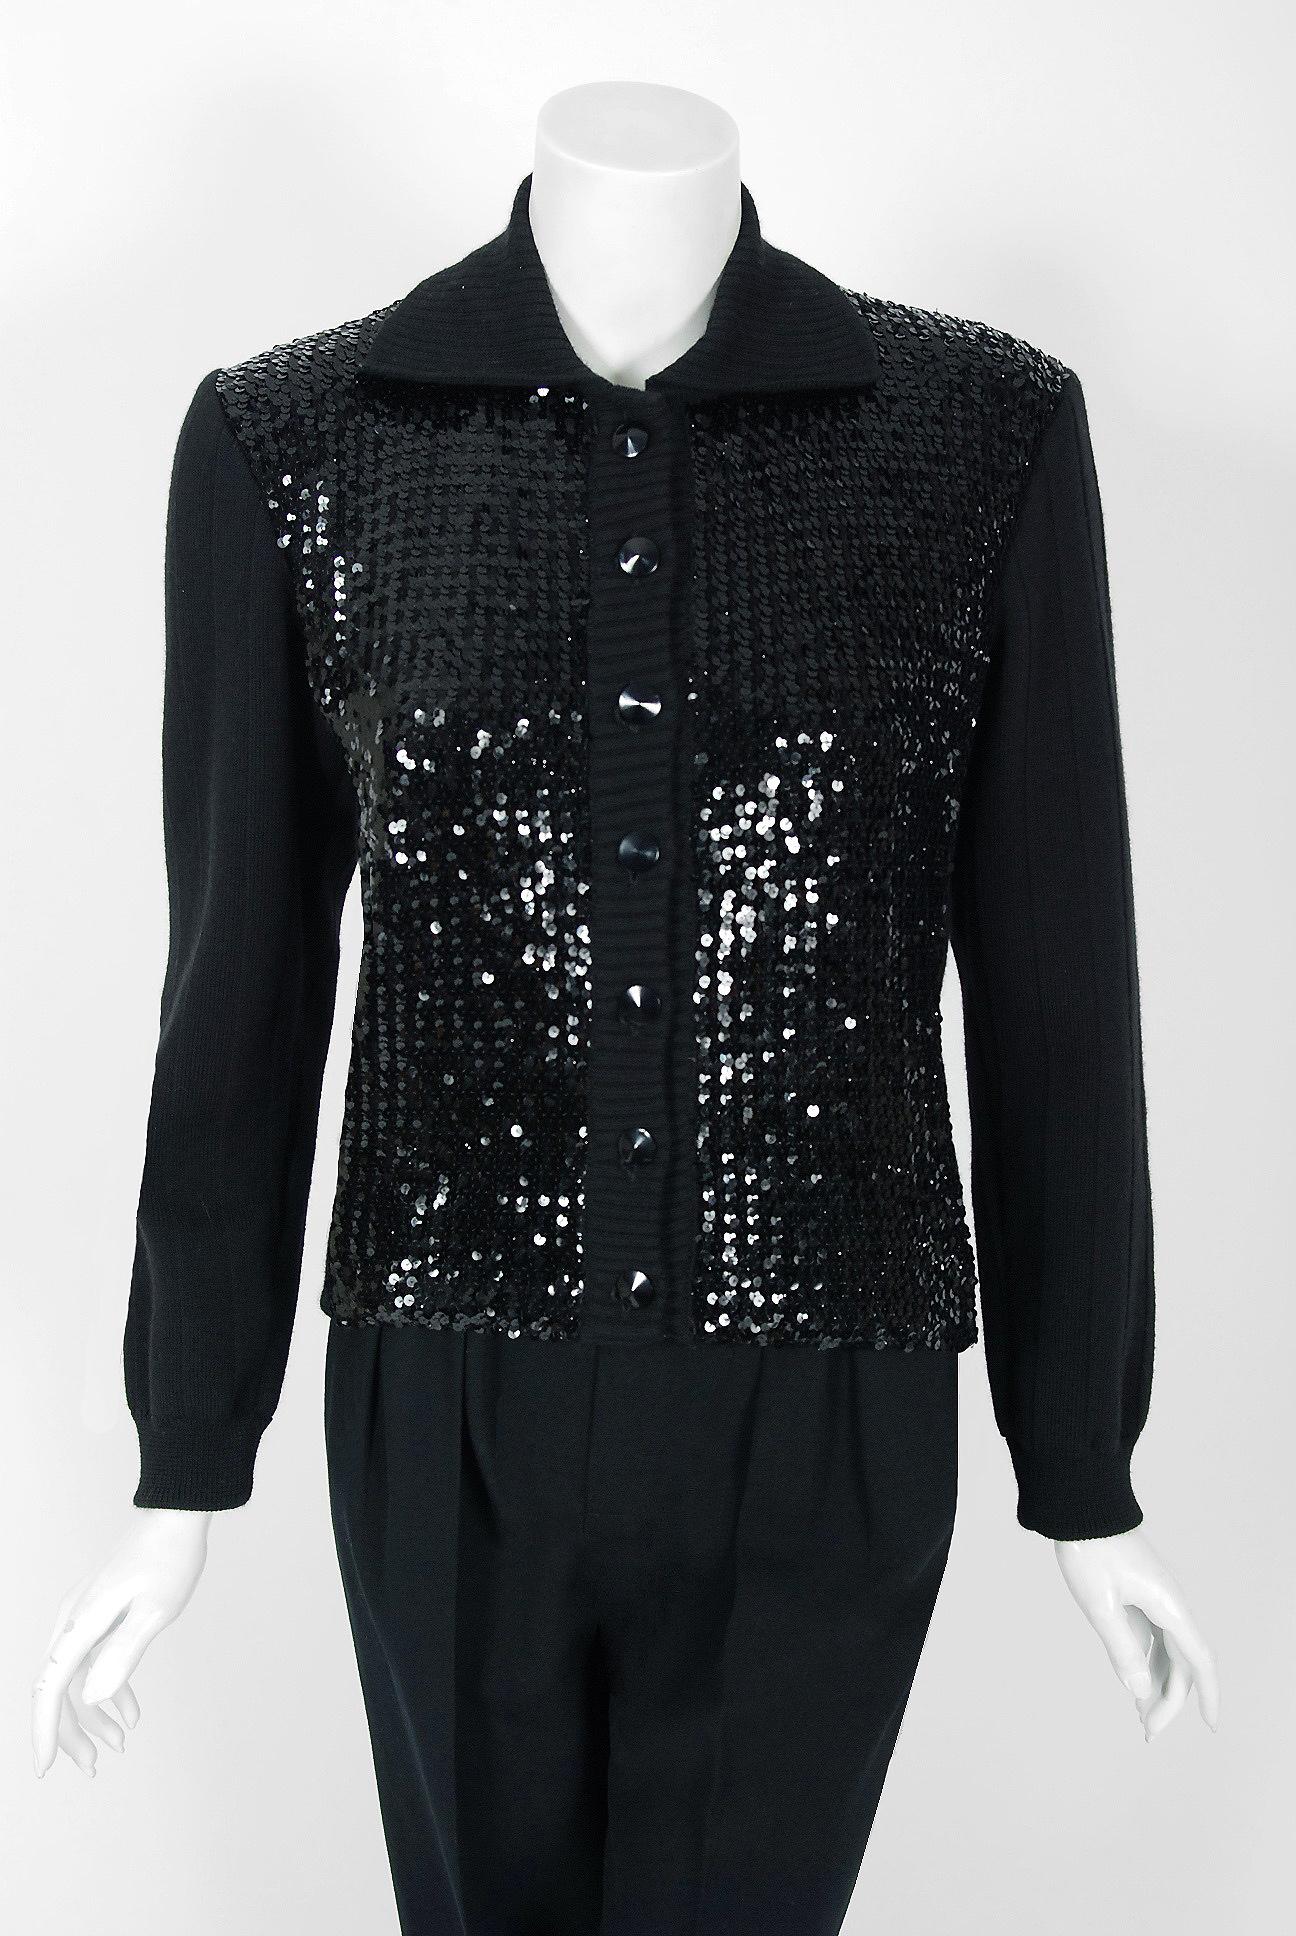 Vintage 1974 Yves Saint Laurent Sequin Black Wool Jumper Le Smoking Trousers Suit In Good Condition For Sale In Beverly Hills, CA